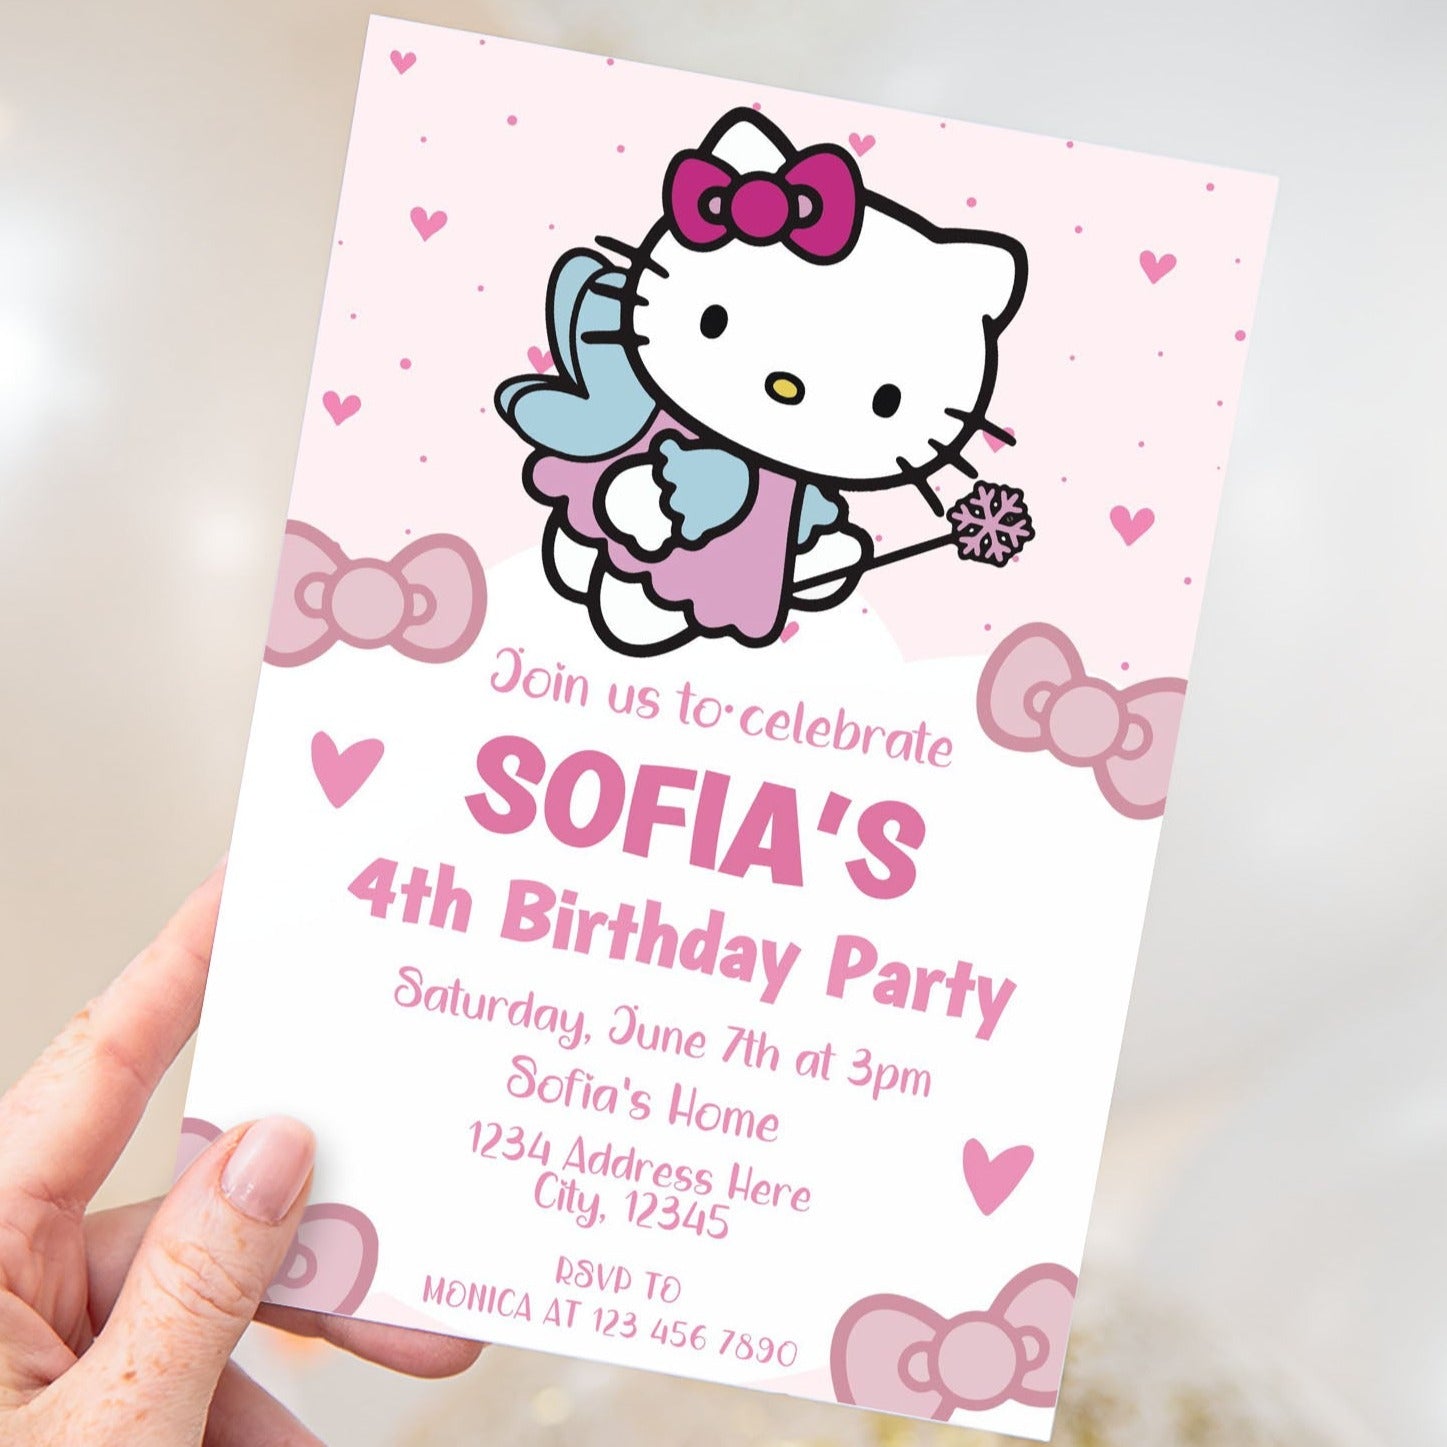 Editable Hello Kitty invitation template featuring vibrant colors and playful design elements